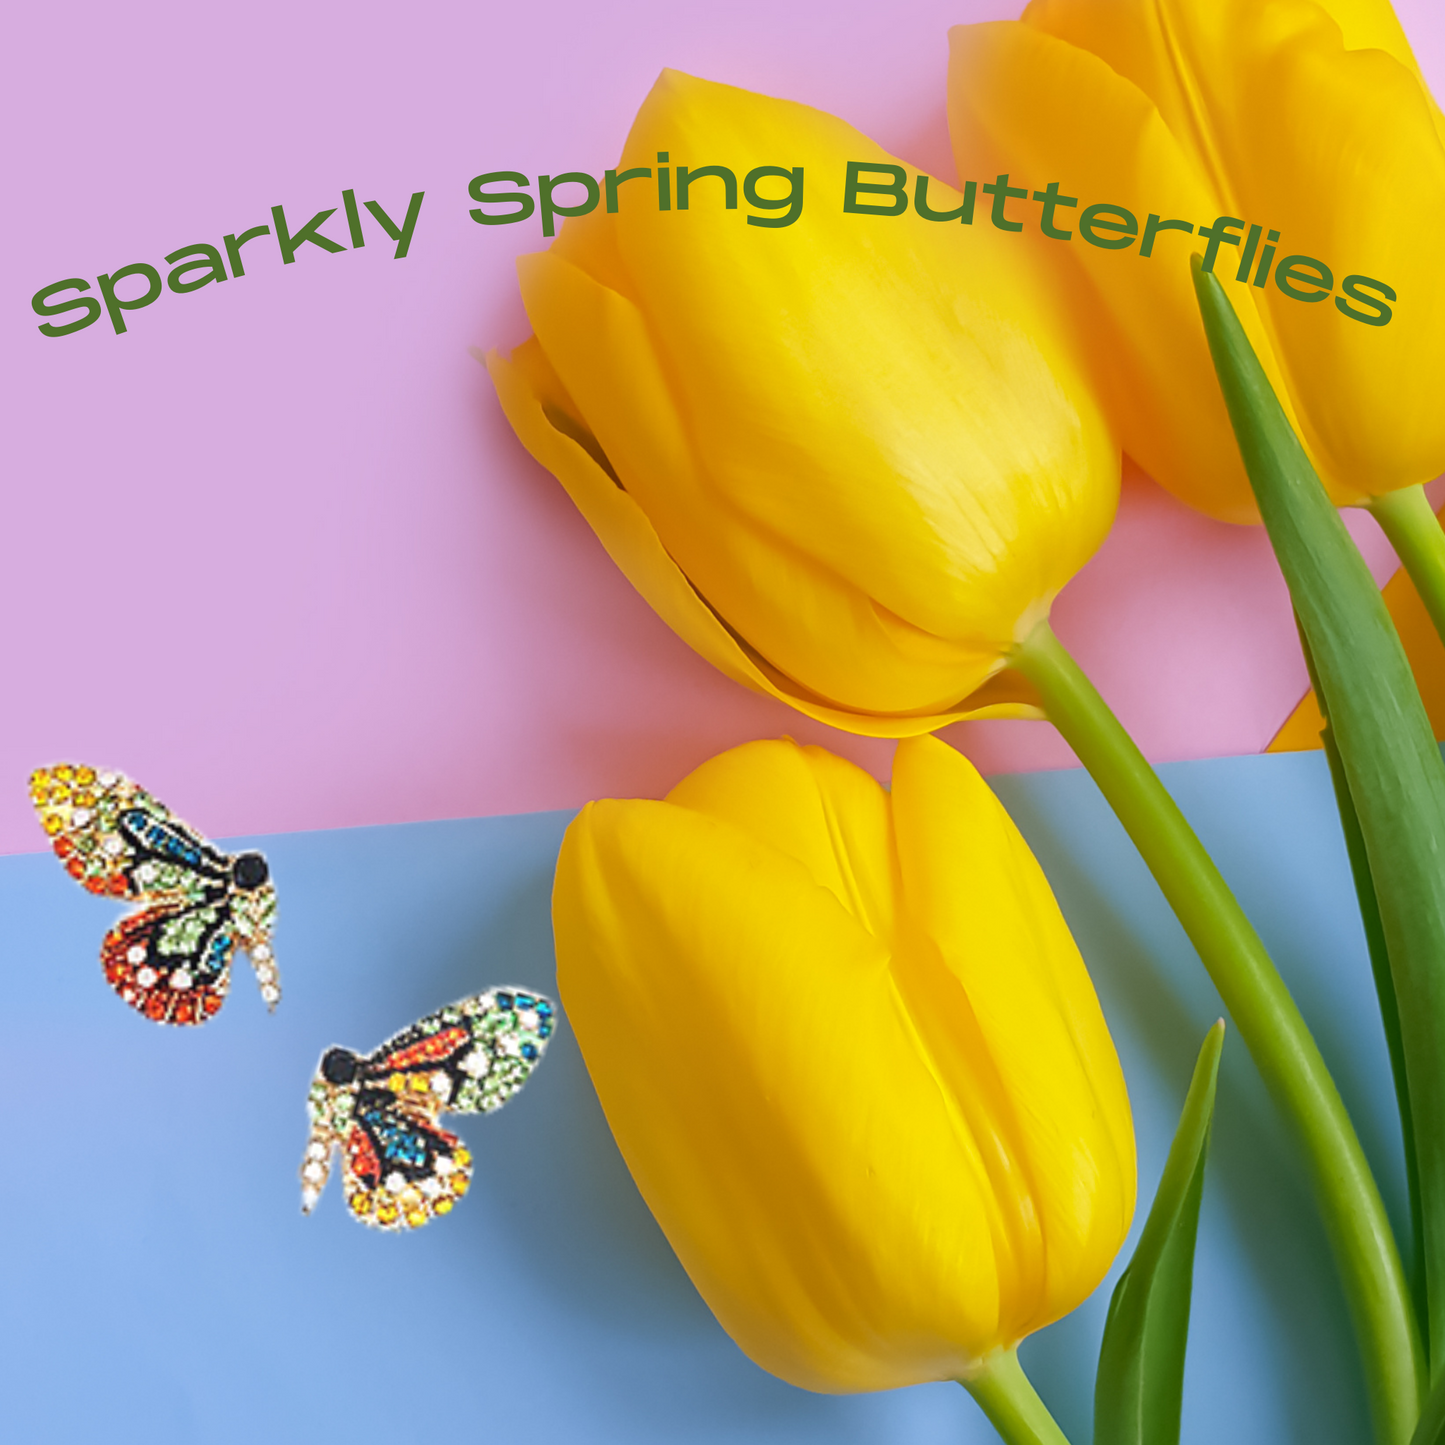 Butterfly Earrings with Colorful Crystals